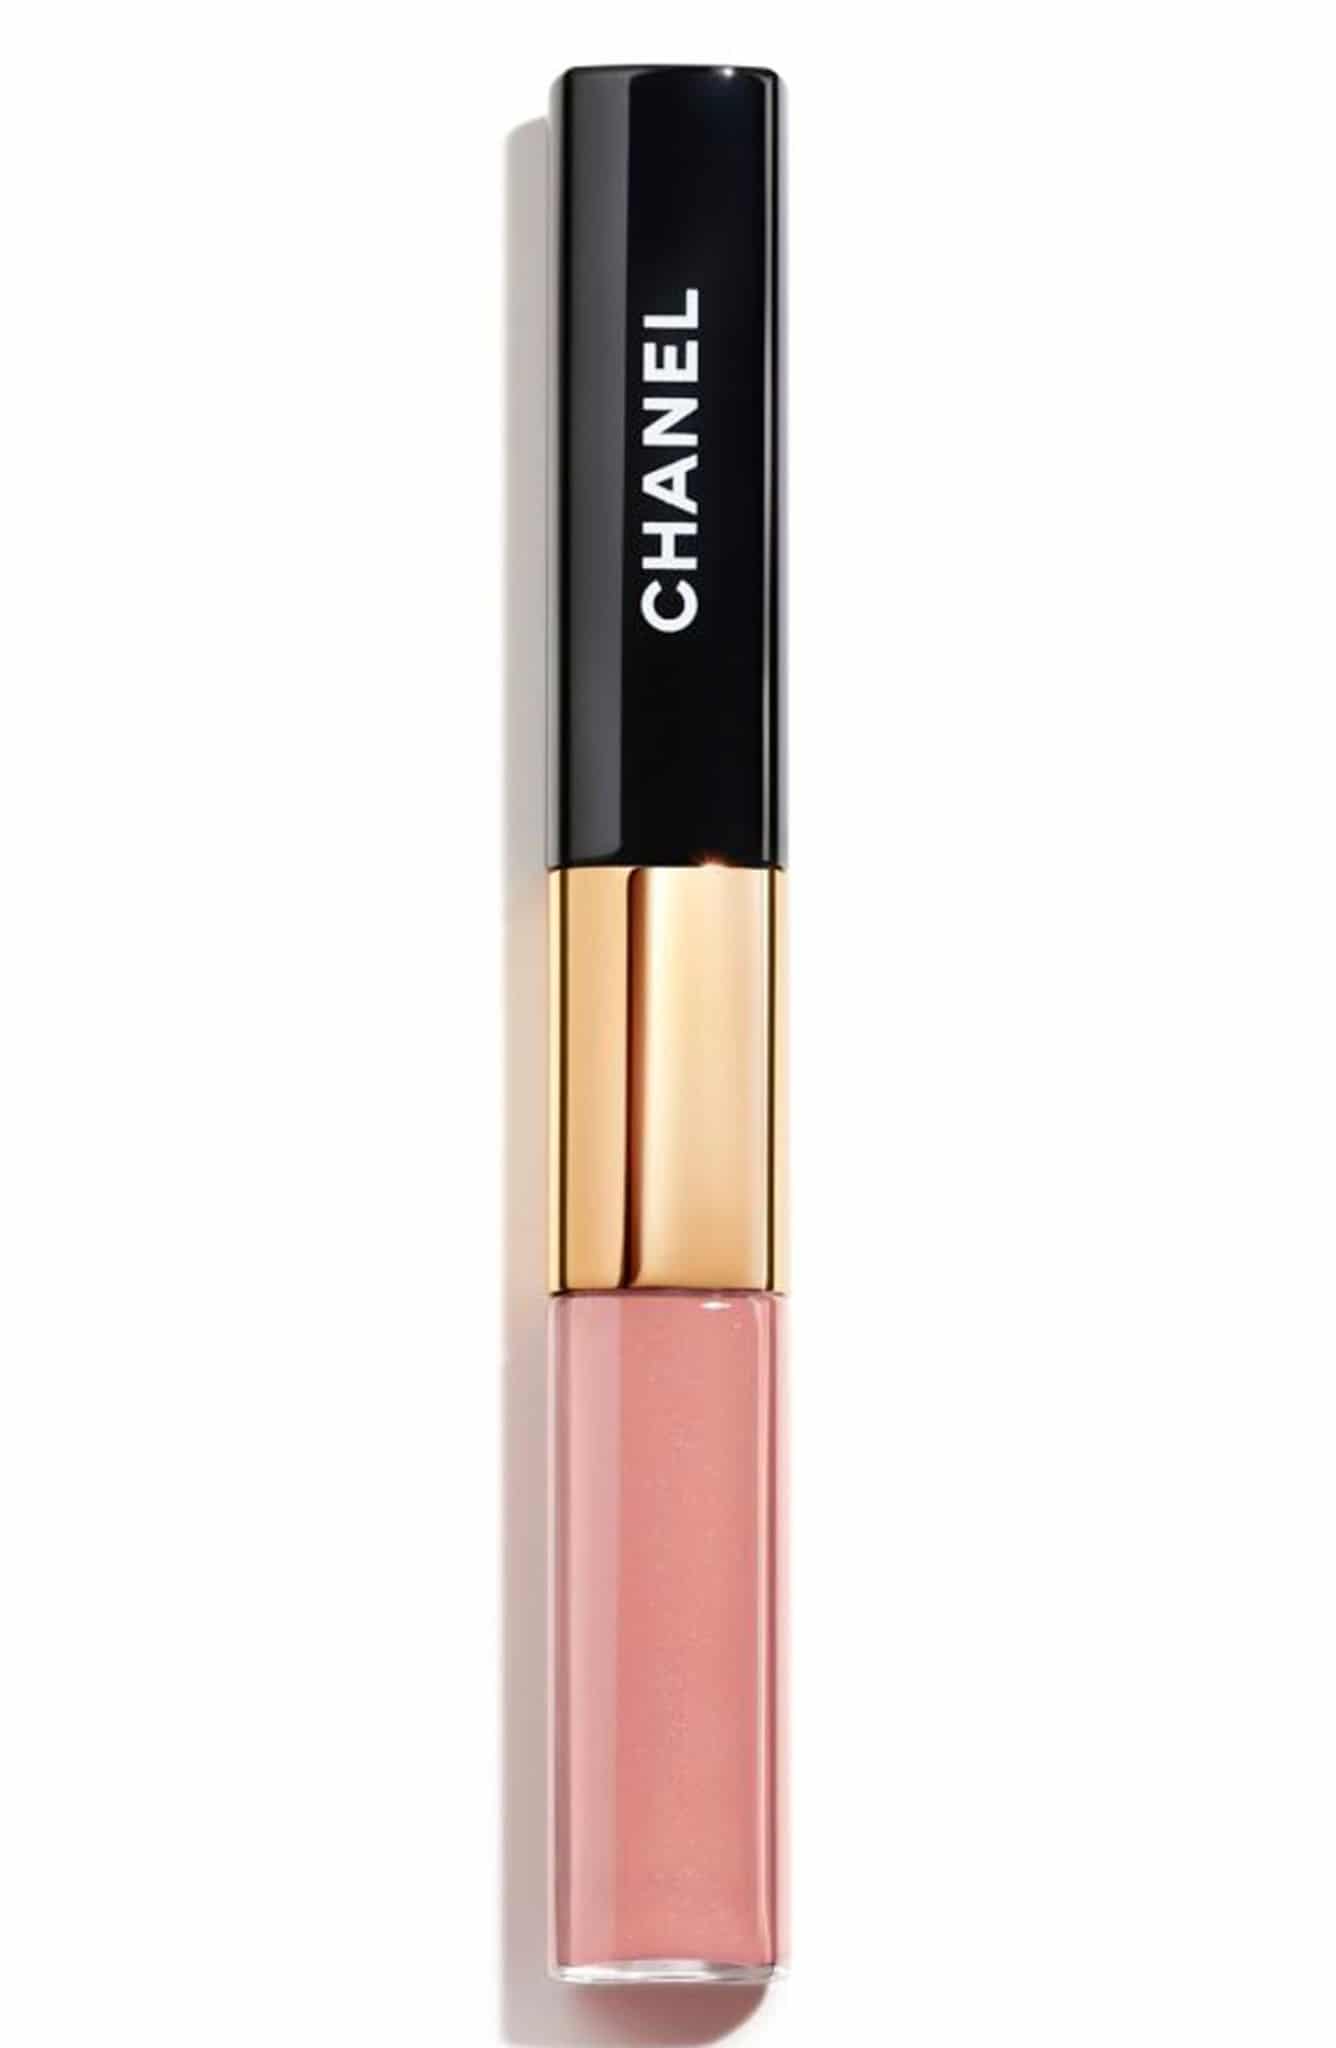 Chanel pink lipgloss - lipstick - beauty product - Nordstrom